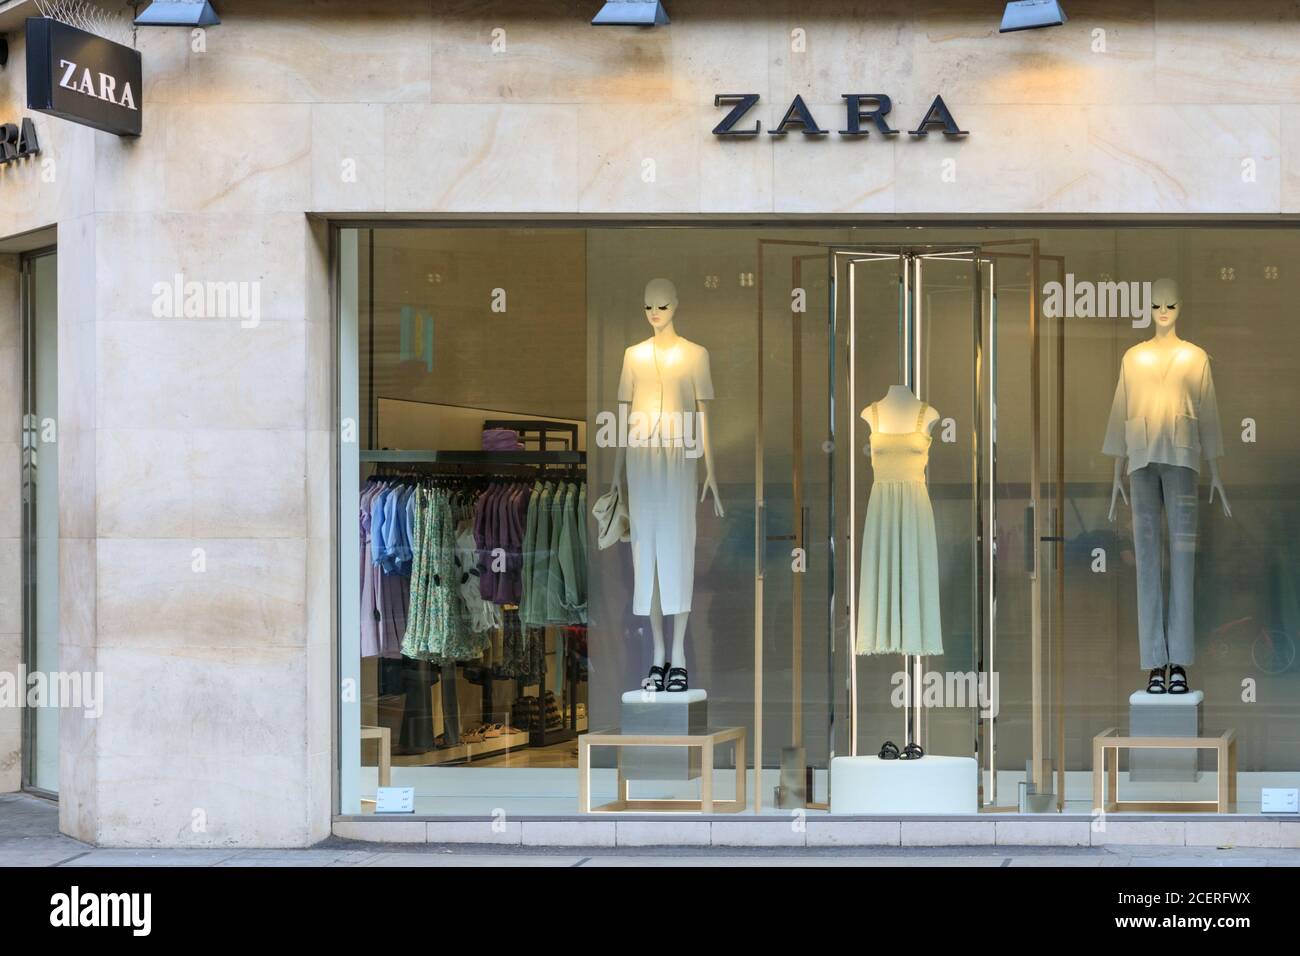 Zara clothing chain store and shop window in London, England, UK Stock  Photo - Alamy